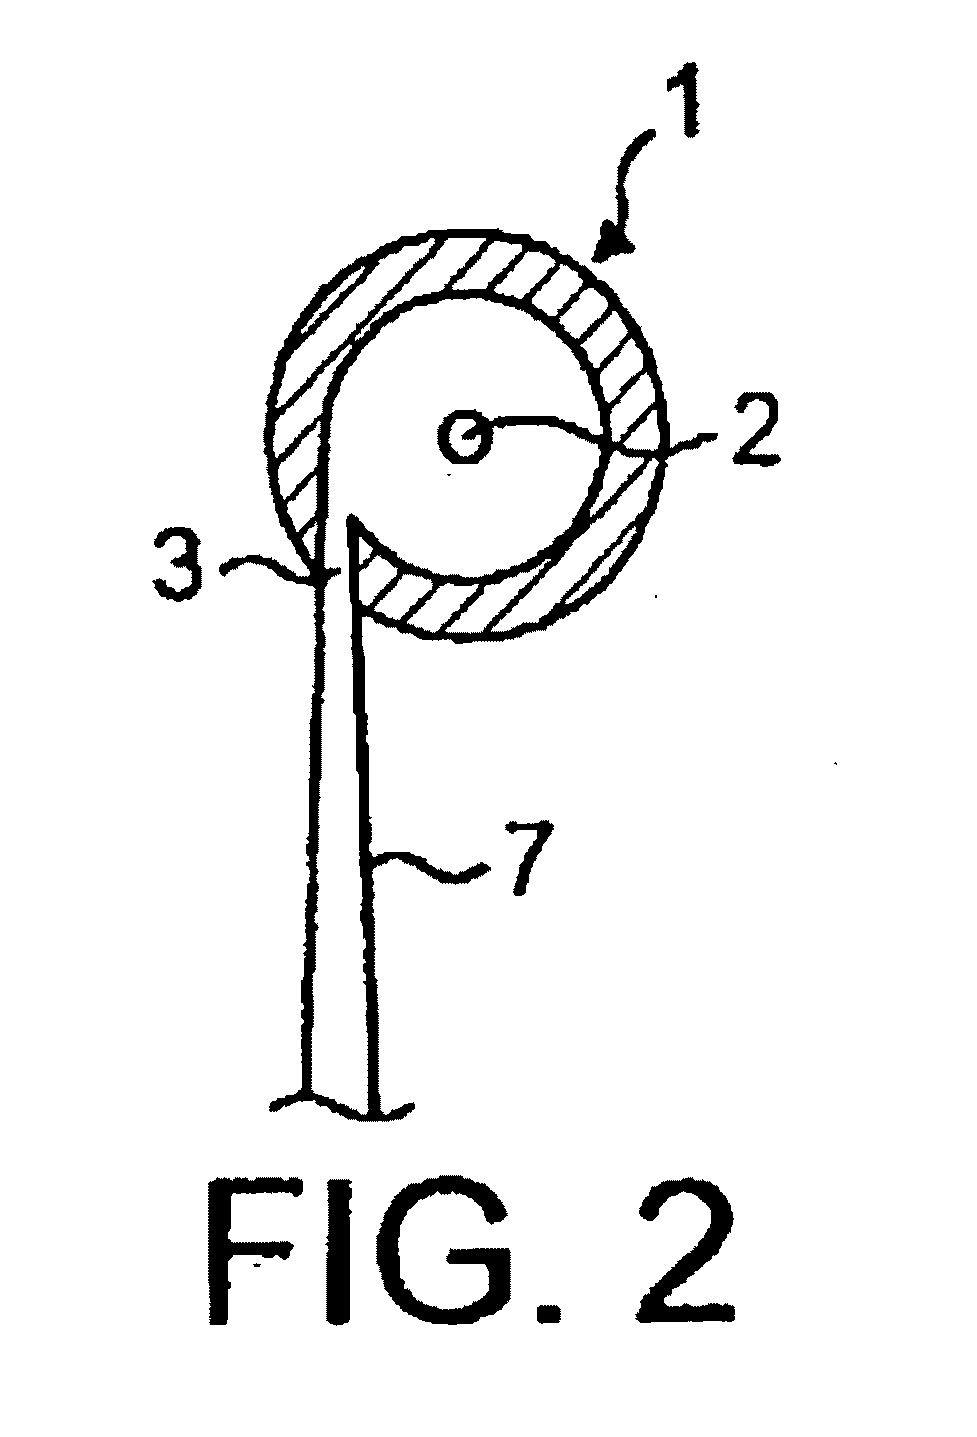 Composition, device, and method for treating sexual dysfunction via inhalation